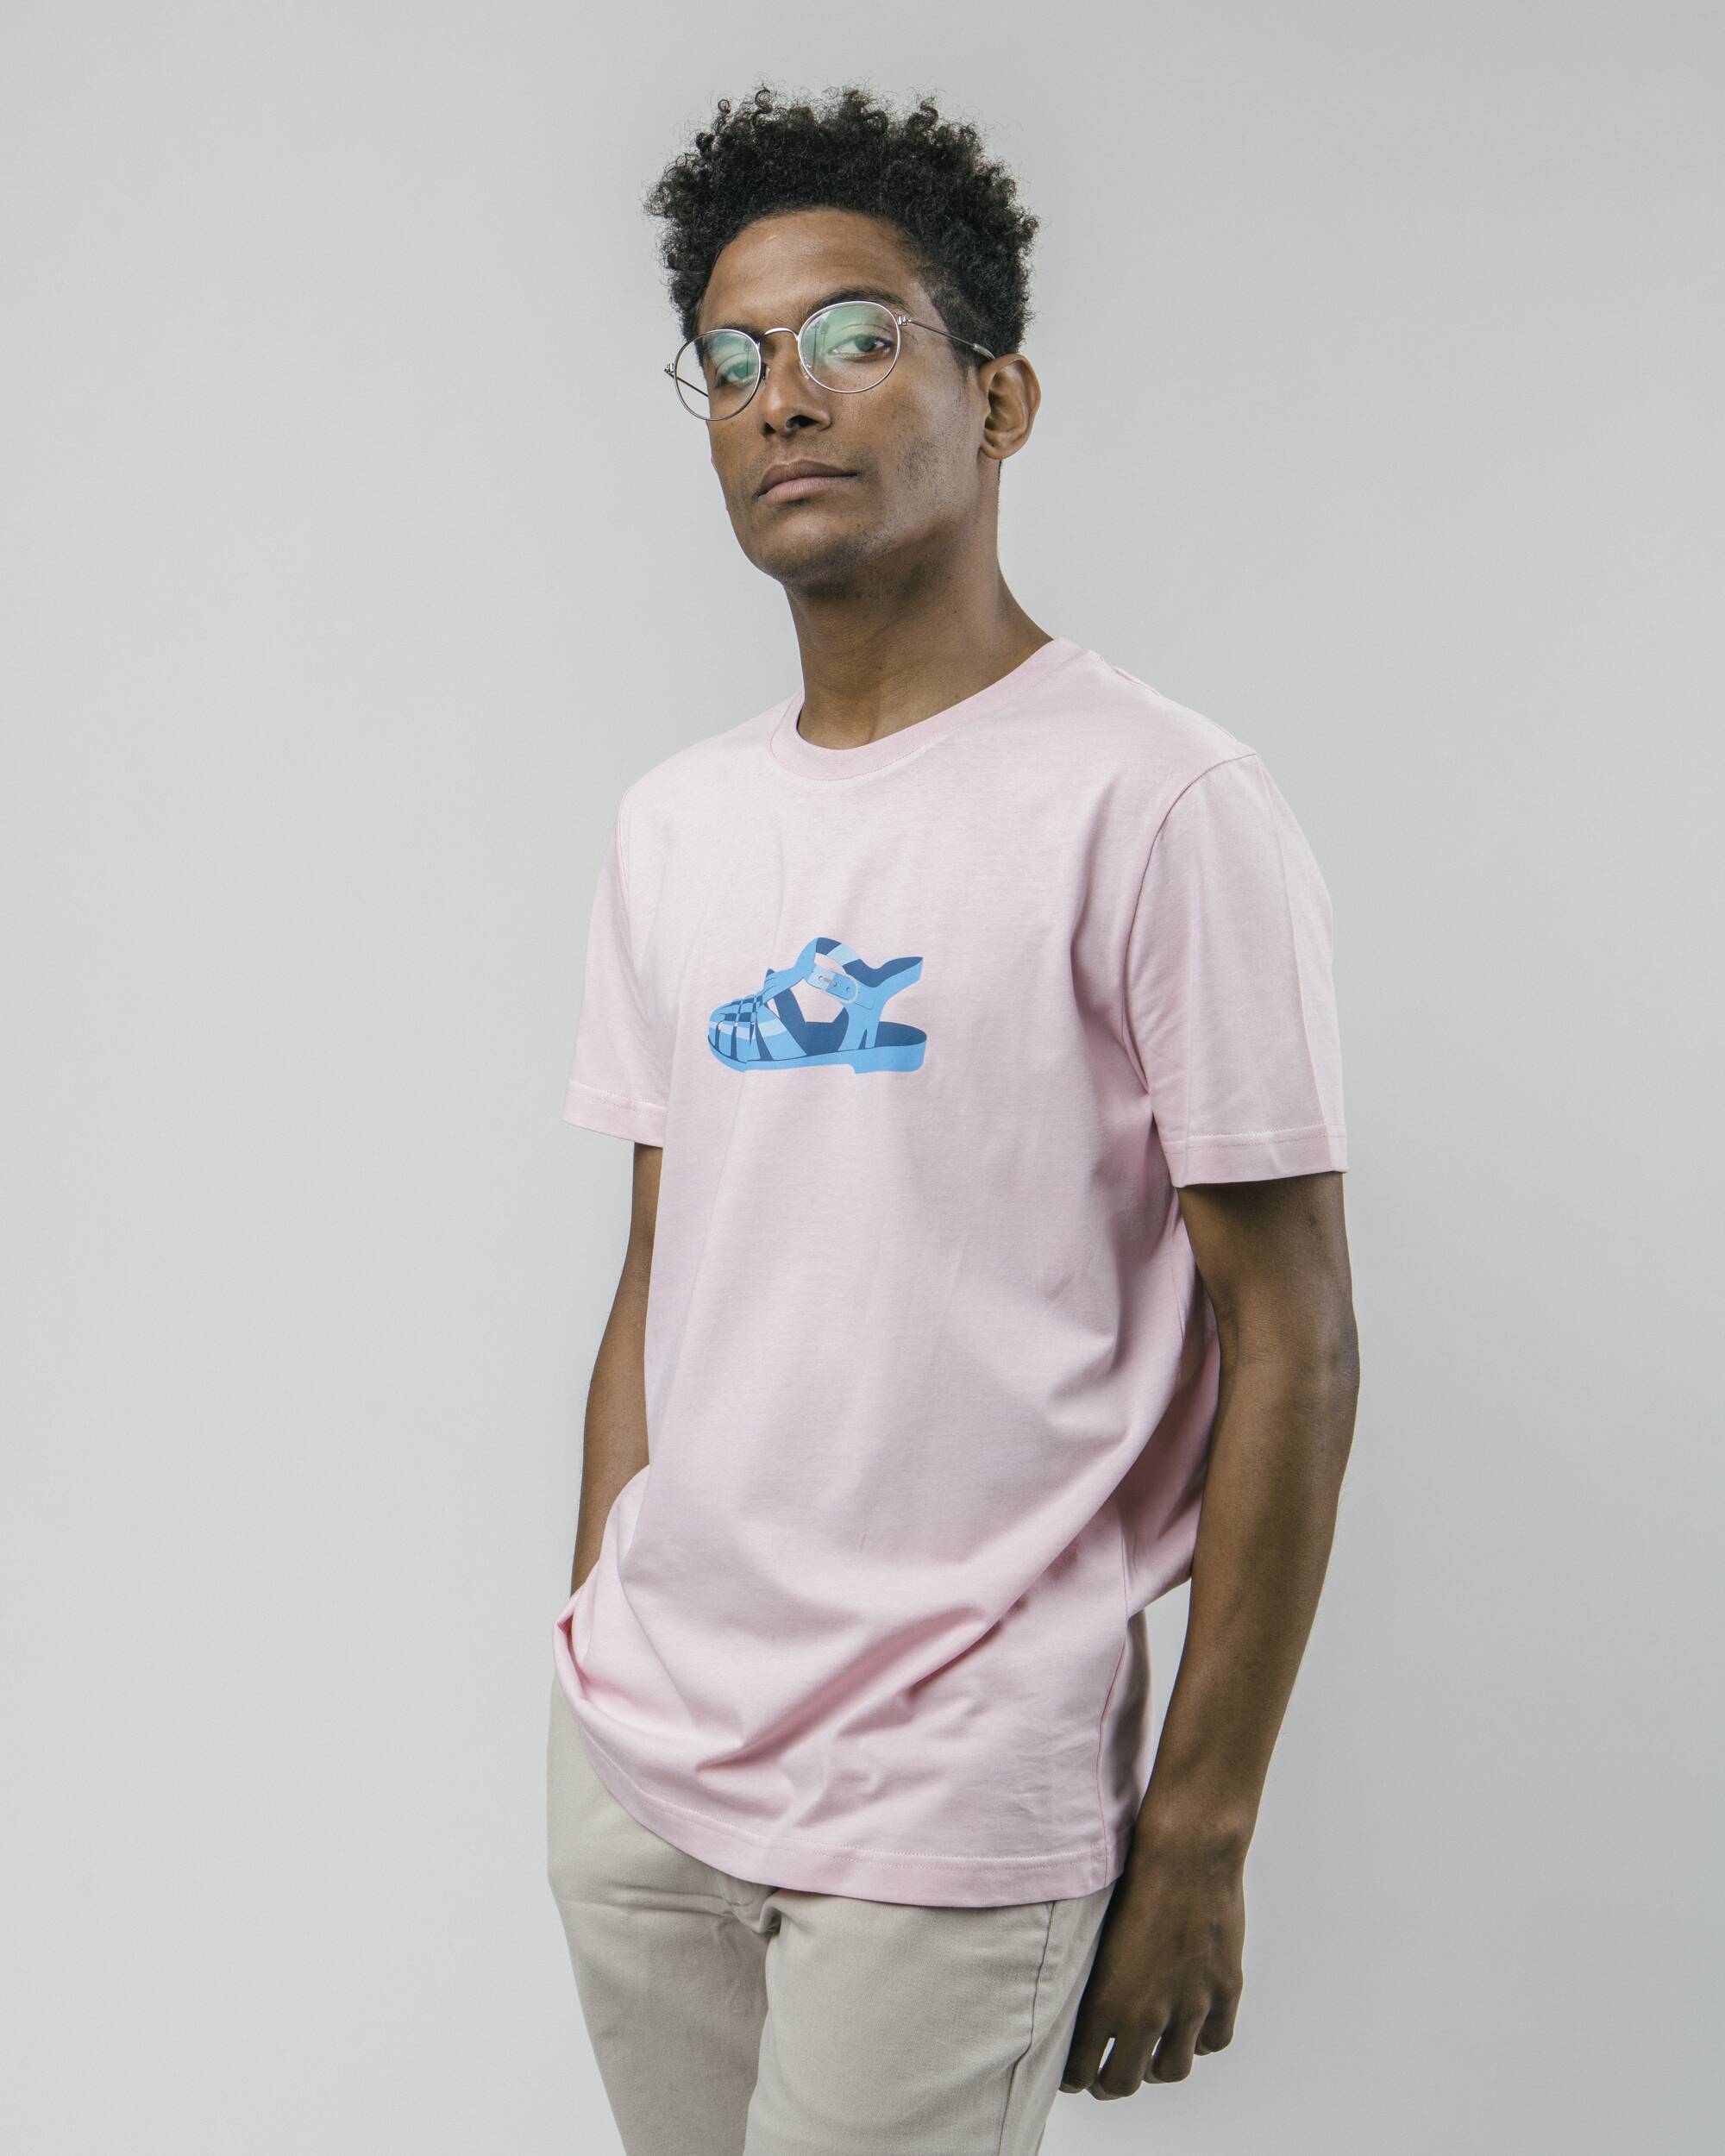 Iconic Jelly T-shirt in pink with a great print made from 100% organic cotton from Brava Fabrics